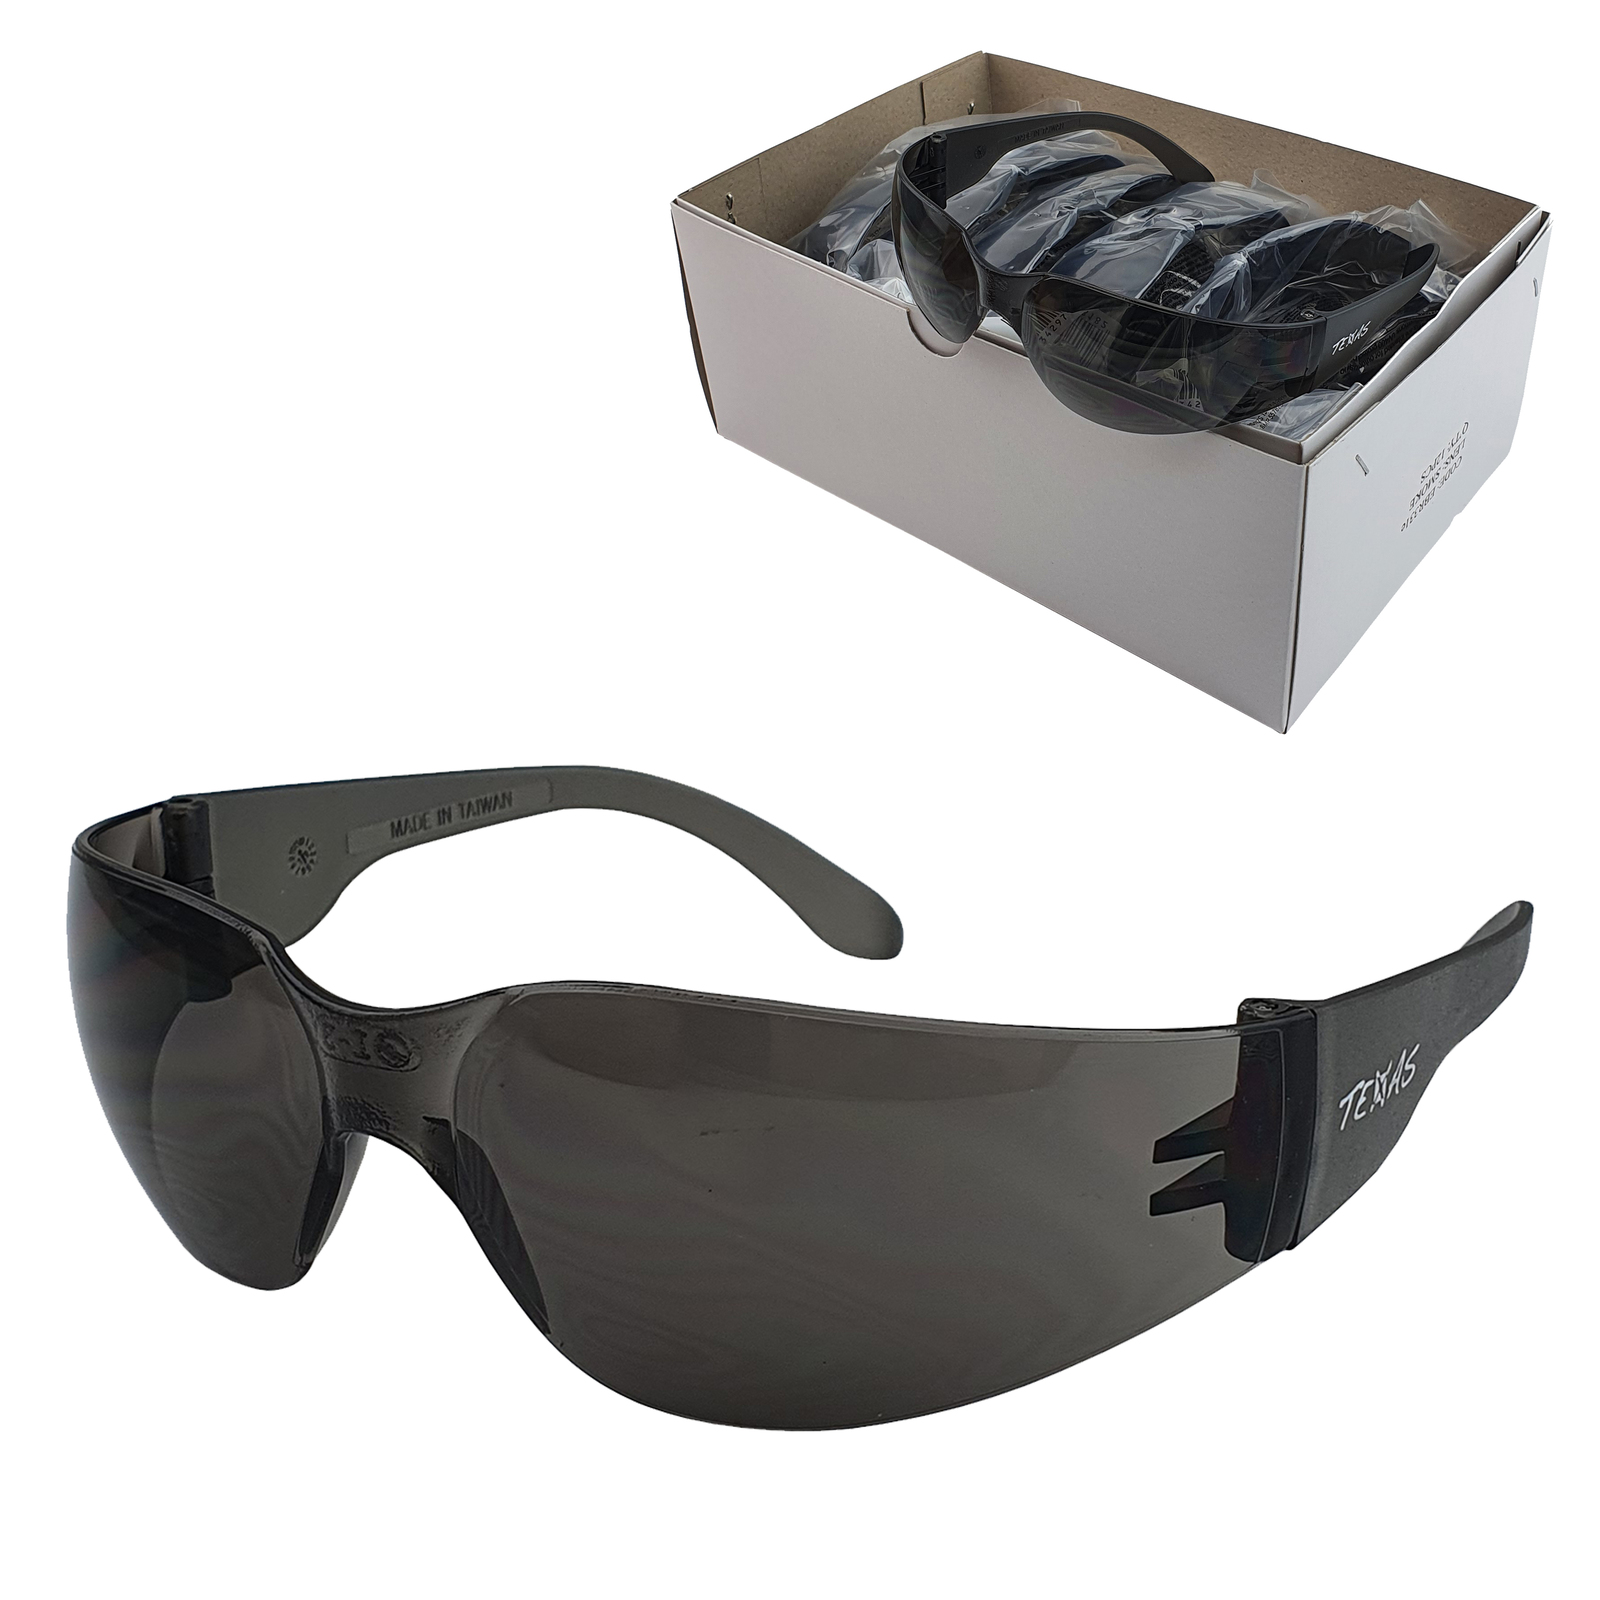 1 Pair Smoke Lens Industrial Safety Glasses - Texas